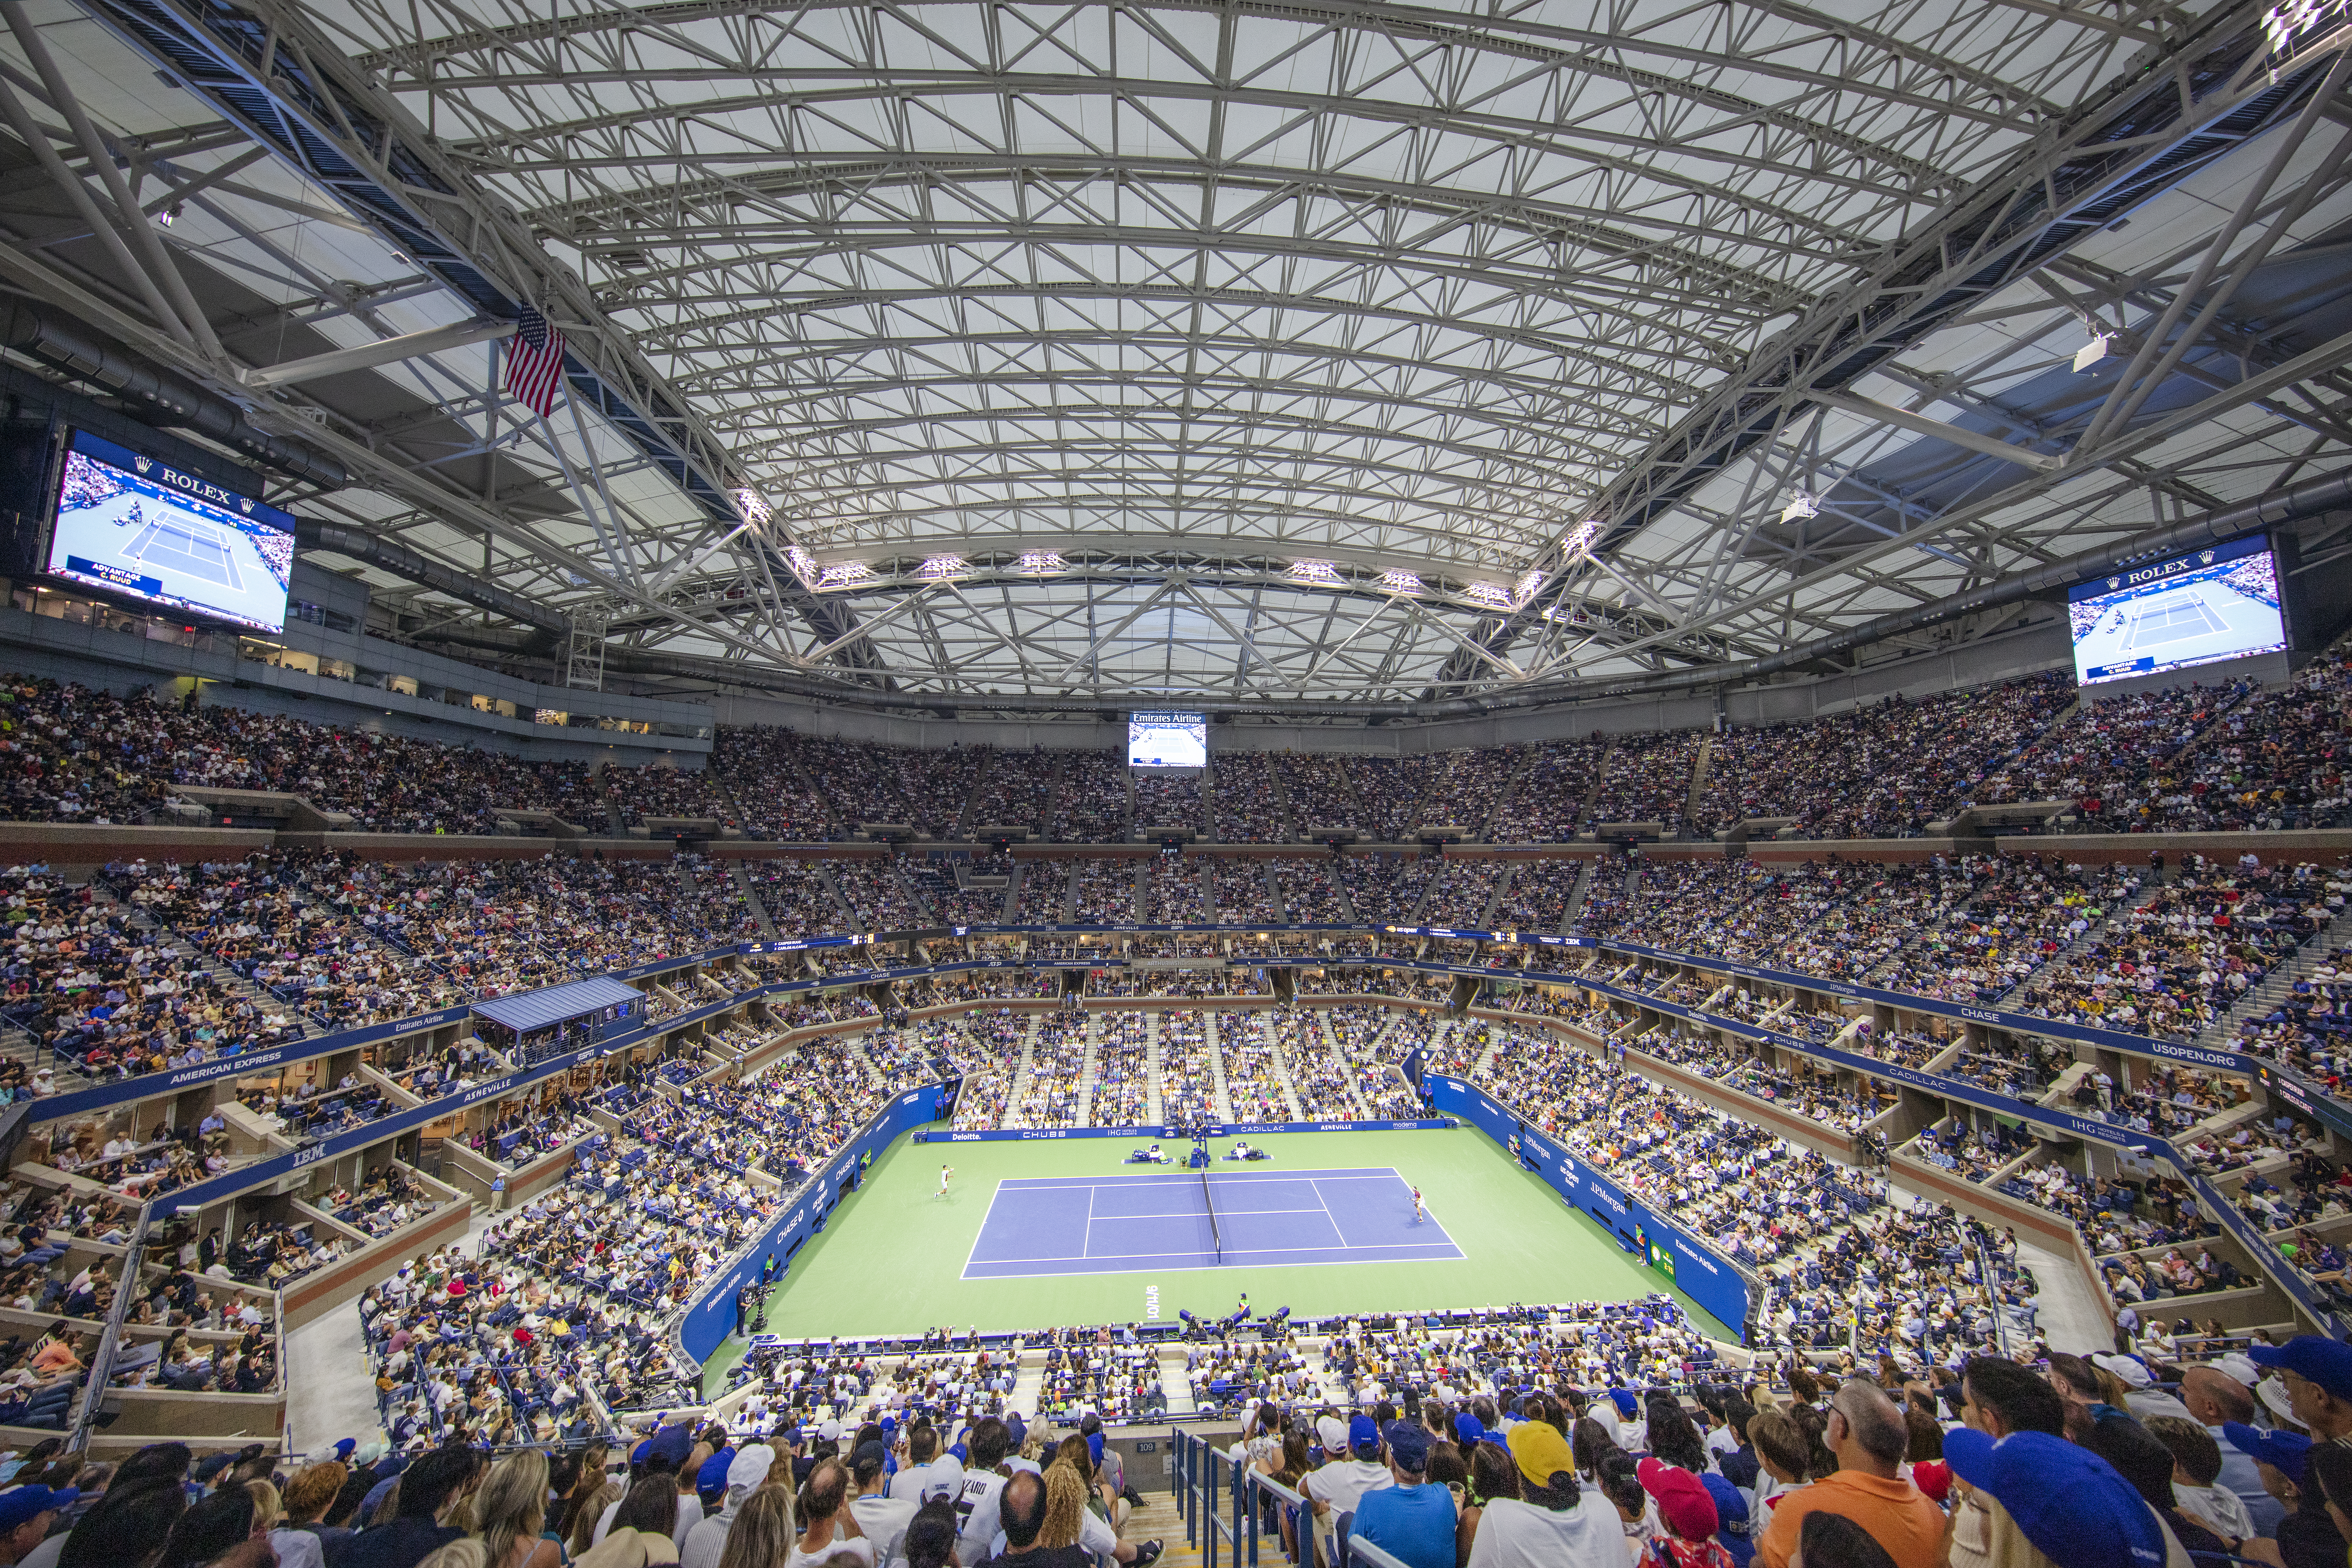 A general view of Carlos Alcaraz of Spain in action against Casper Ruud of Norway in the Mens Singles Final match on Arthur Ashe Stadium with the roof closed during the US Open Tennis Championship 2022 at the USTA National Tennis Centre on September 11th 2022 in Flushing, Queens, New York City.